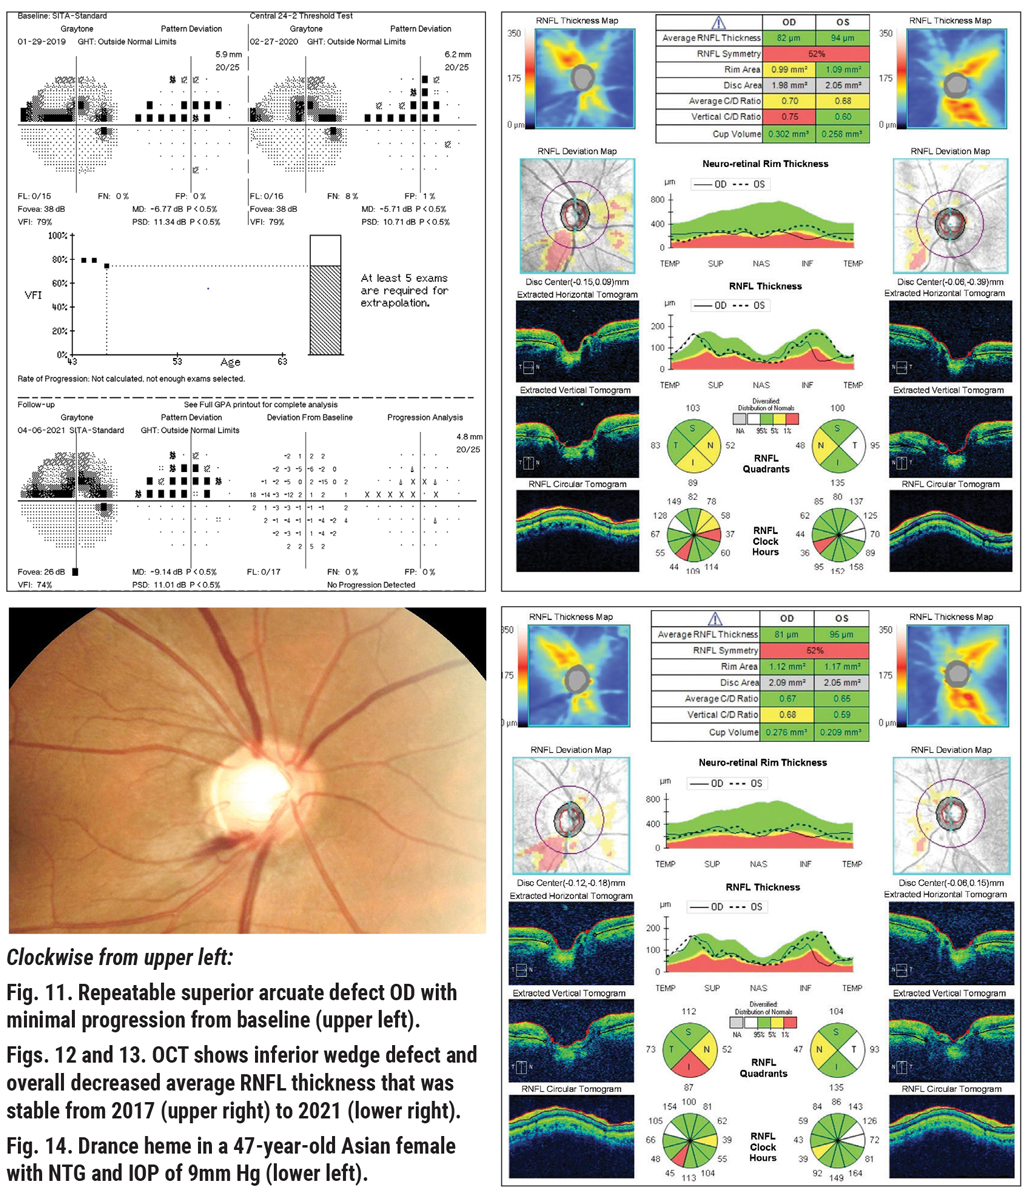 Disc hemorrhages often appears at or near glaucomatous disc/retina sites of change, RNFL defect border and site of peripapillary atrophy, suggesting its development is closely related to structural damage of the disc and/or retina. 